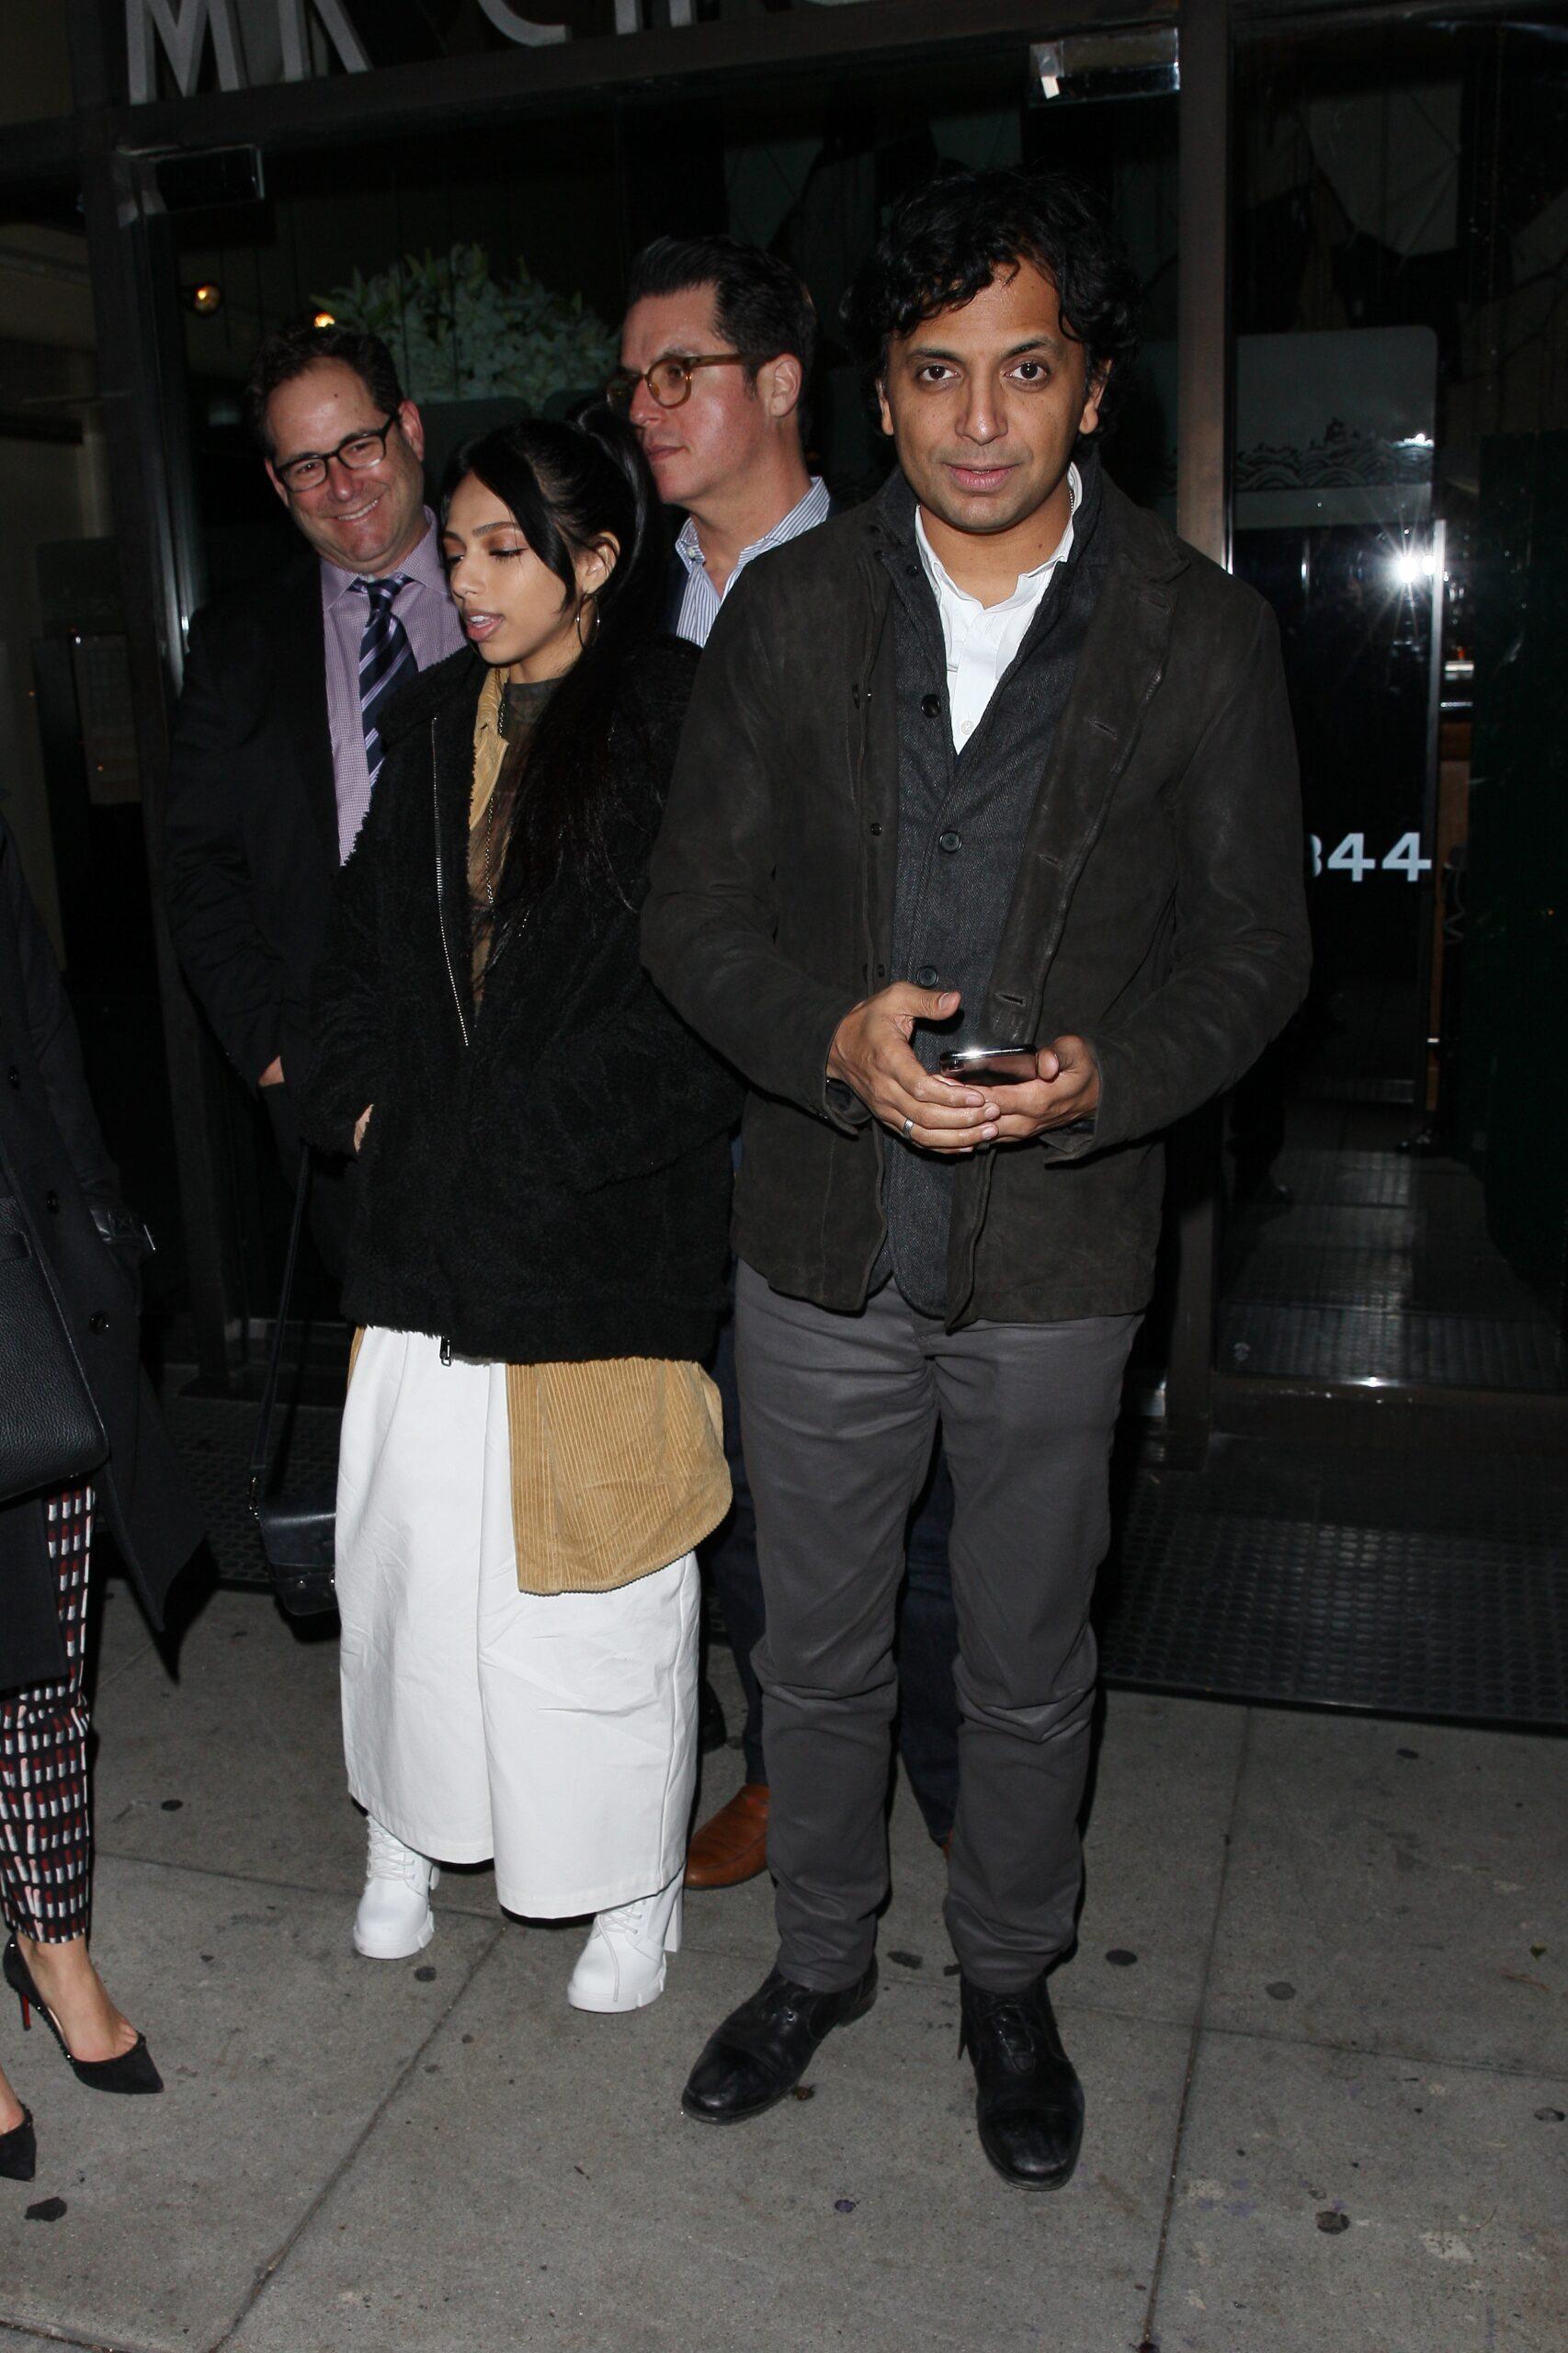 Filmmaker M Night Shyamalan is seen having dinner with his daughter at Mr Chow restaurant